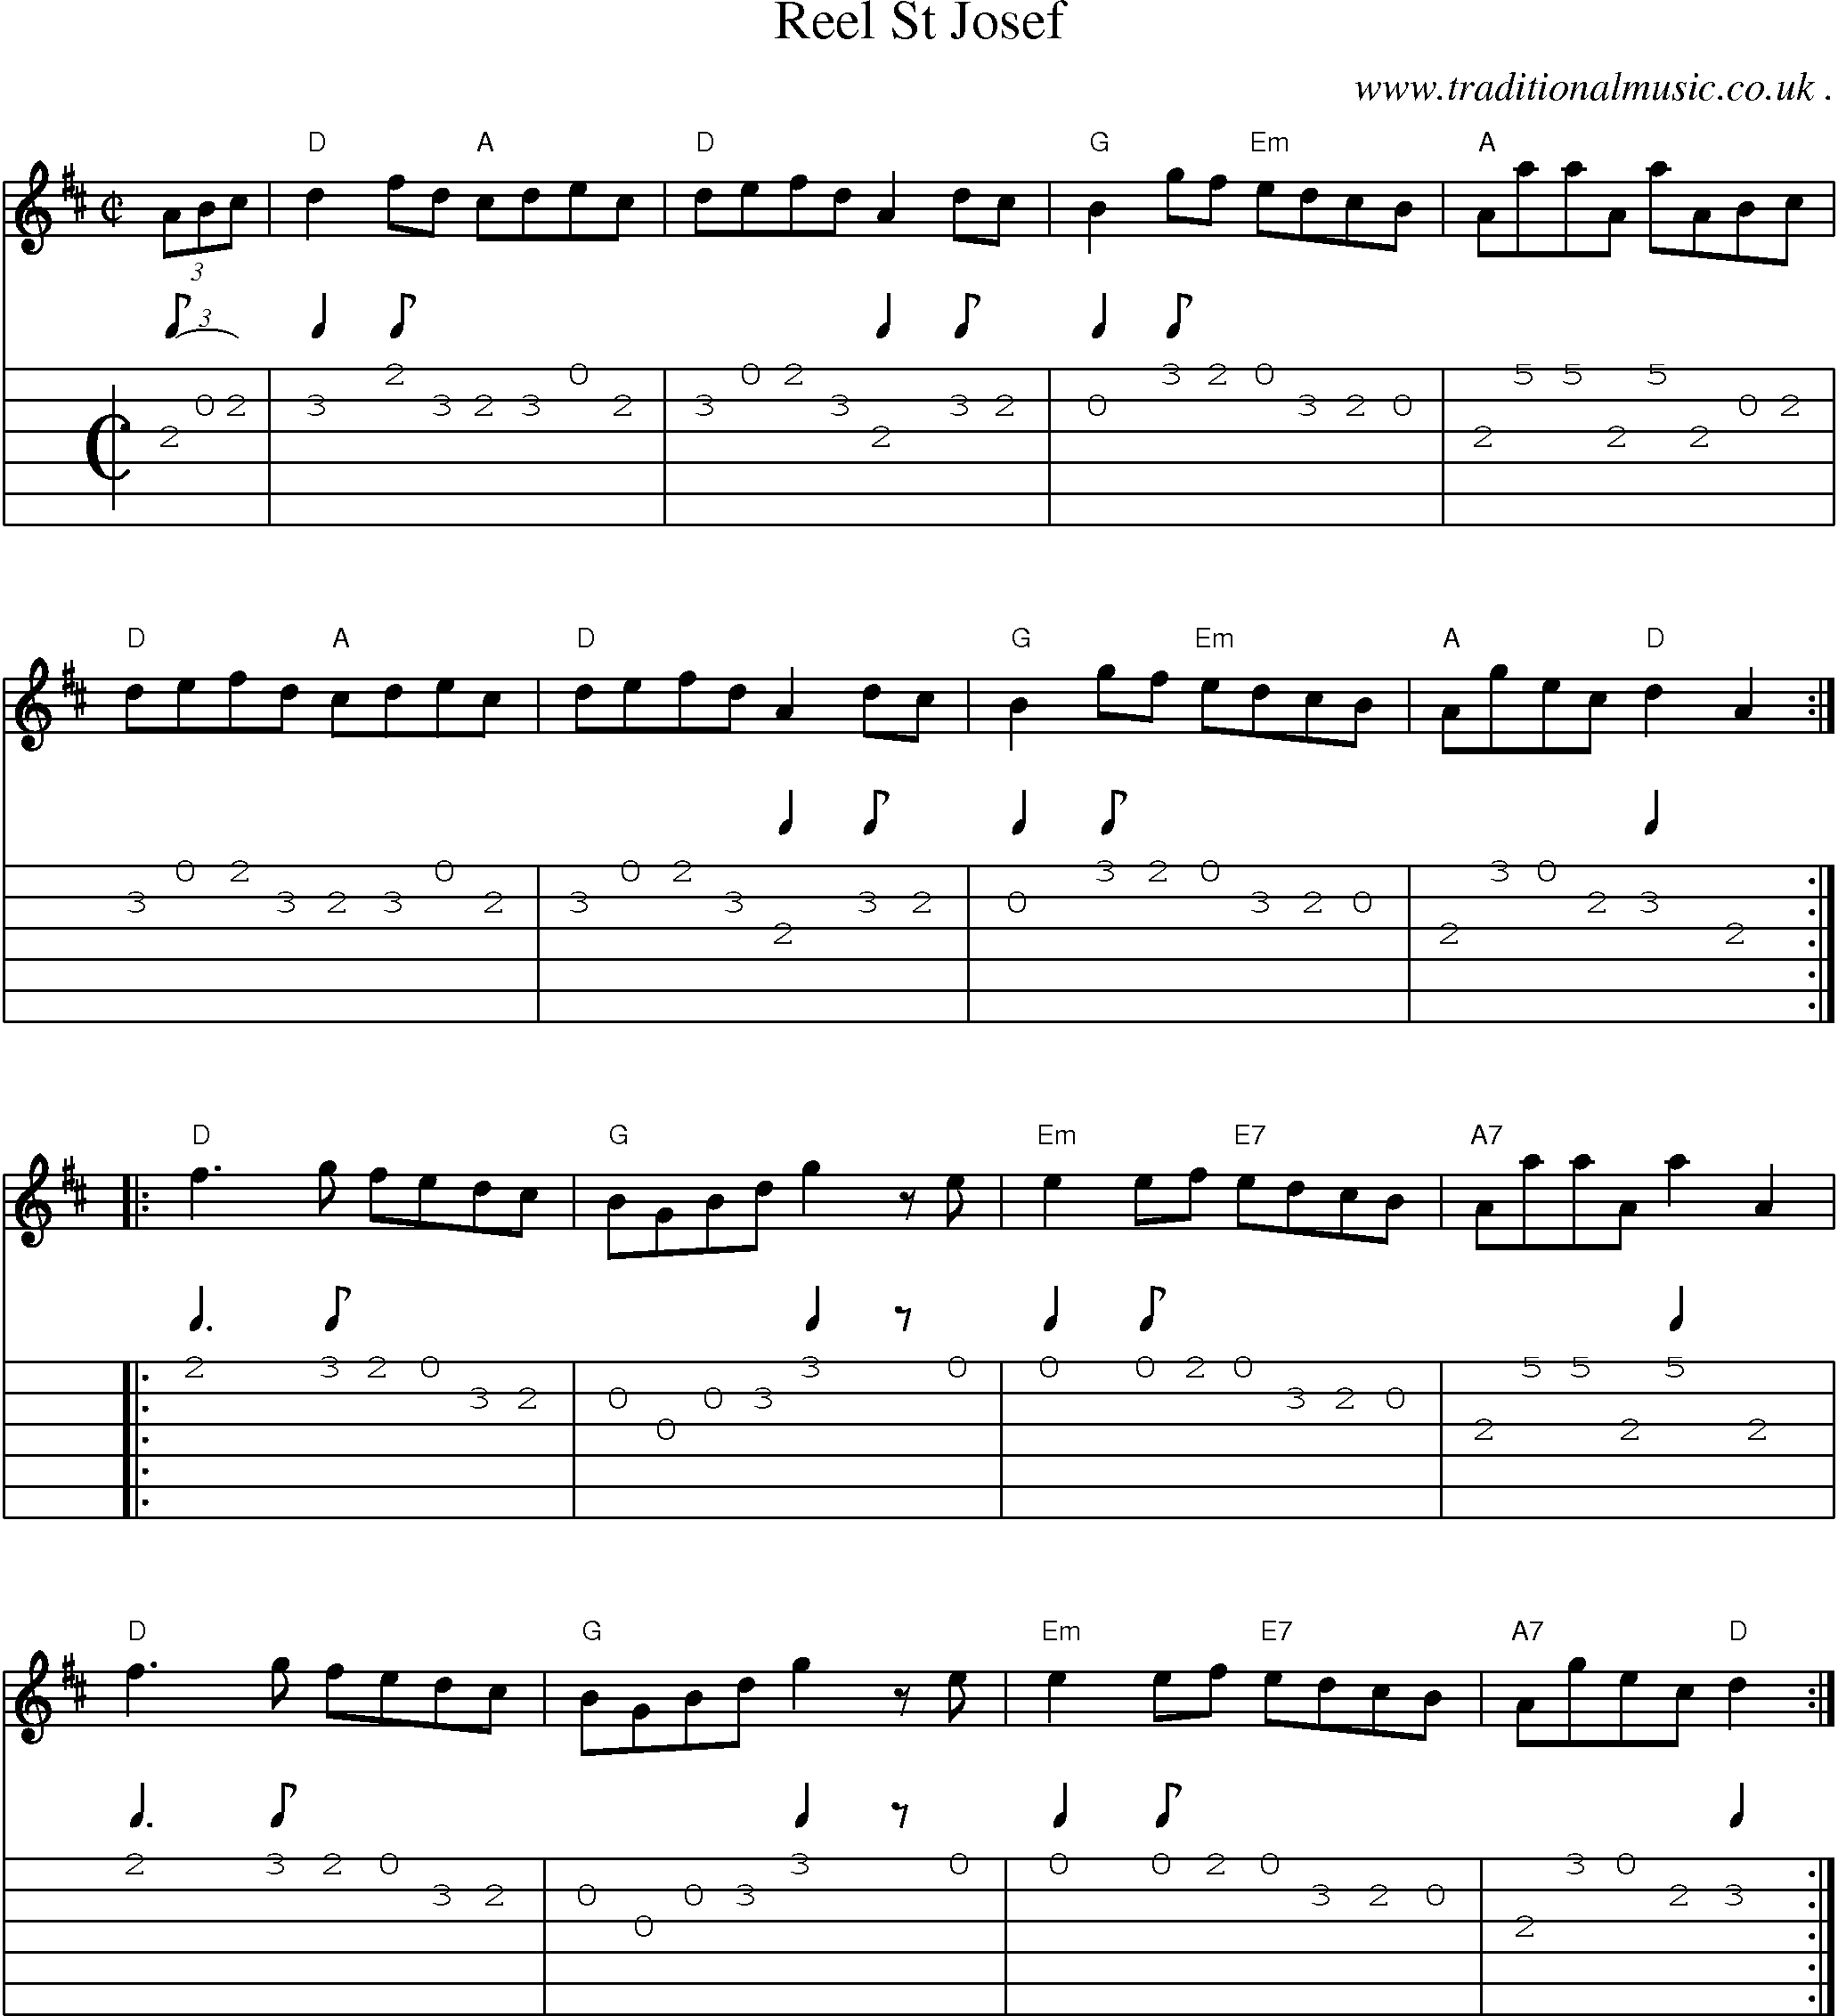 Music Score and Guitar Tabs for Reel St Josef